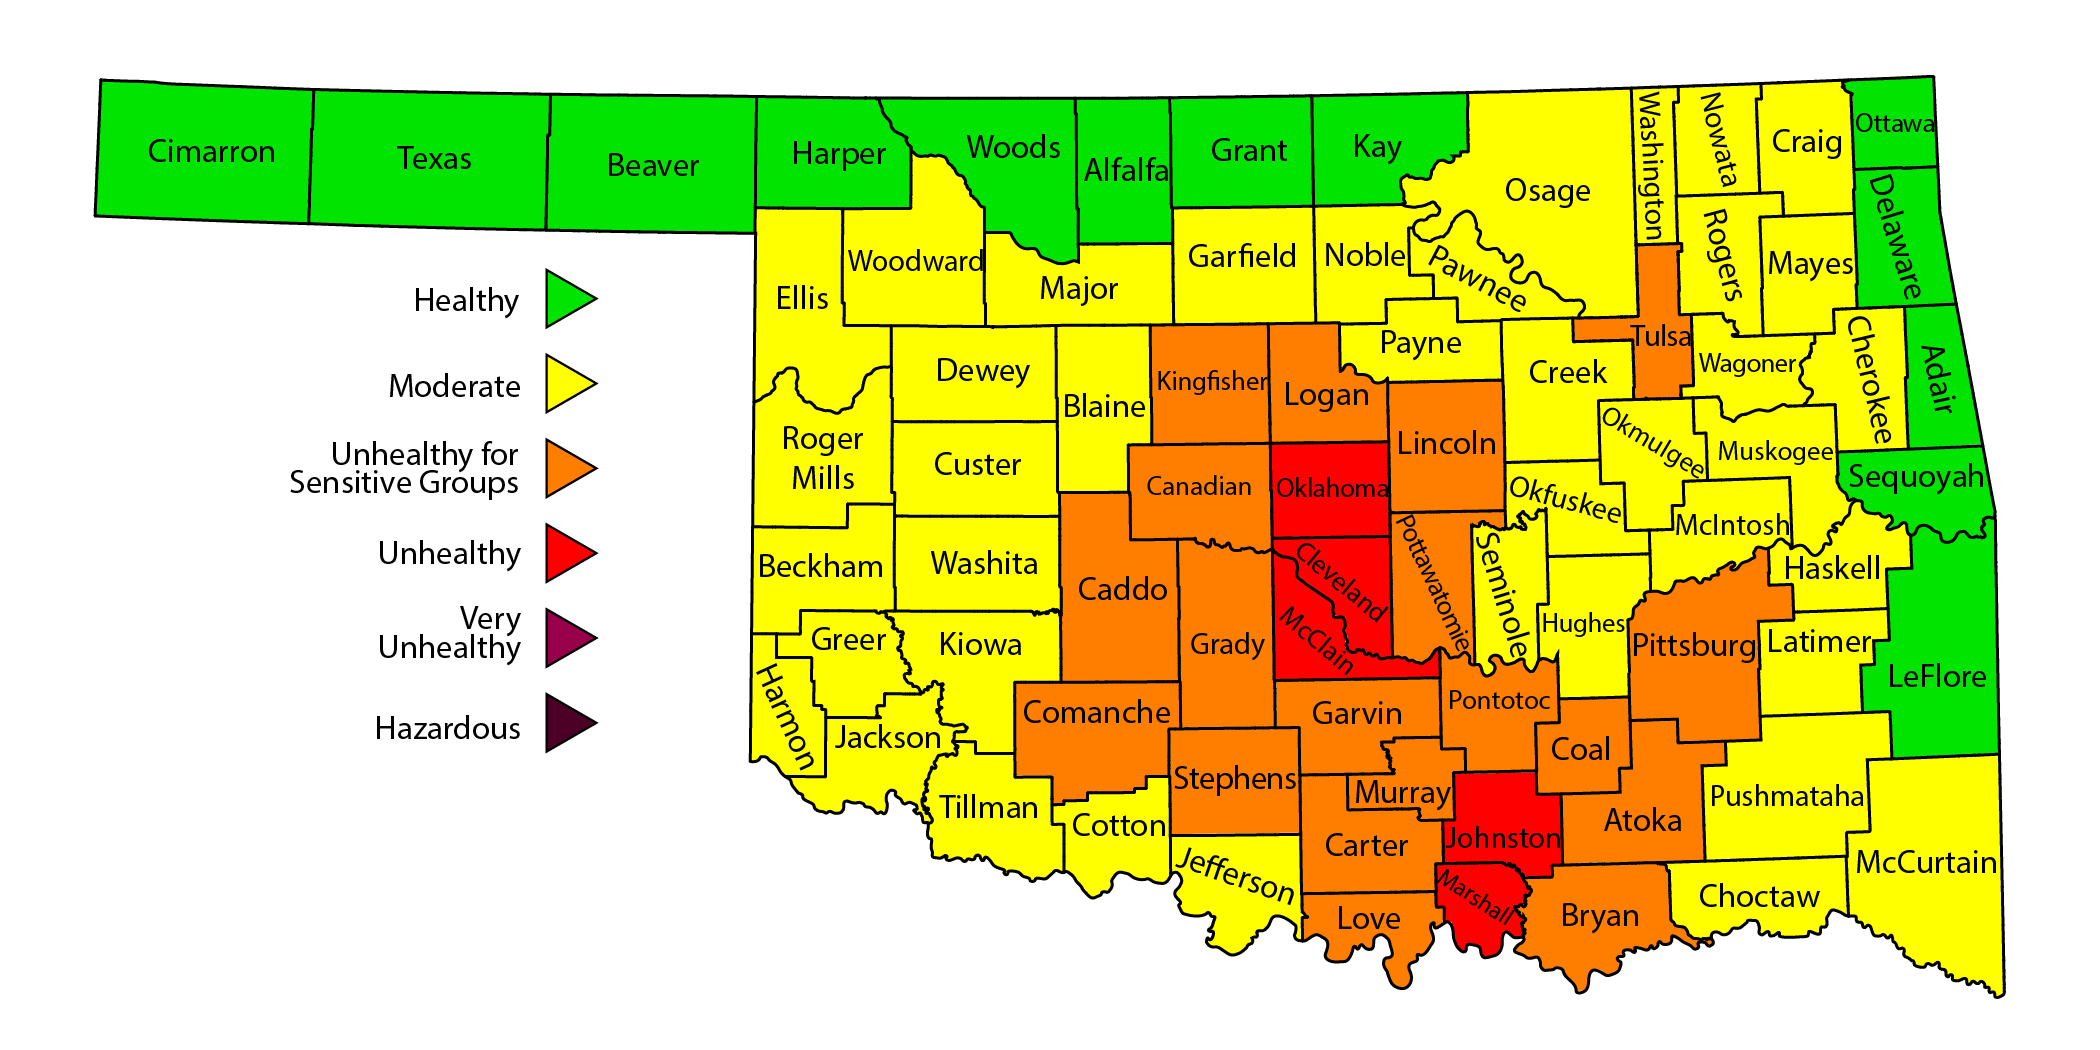 For a graphic of affected counties, visit https://www.deq.ok.gov/air-quality-division/air-quality-health-advisory/